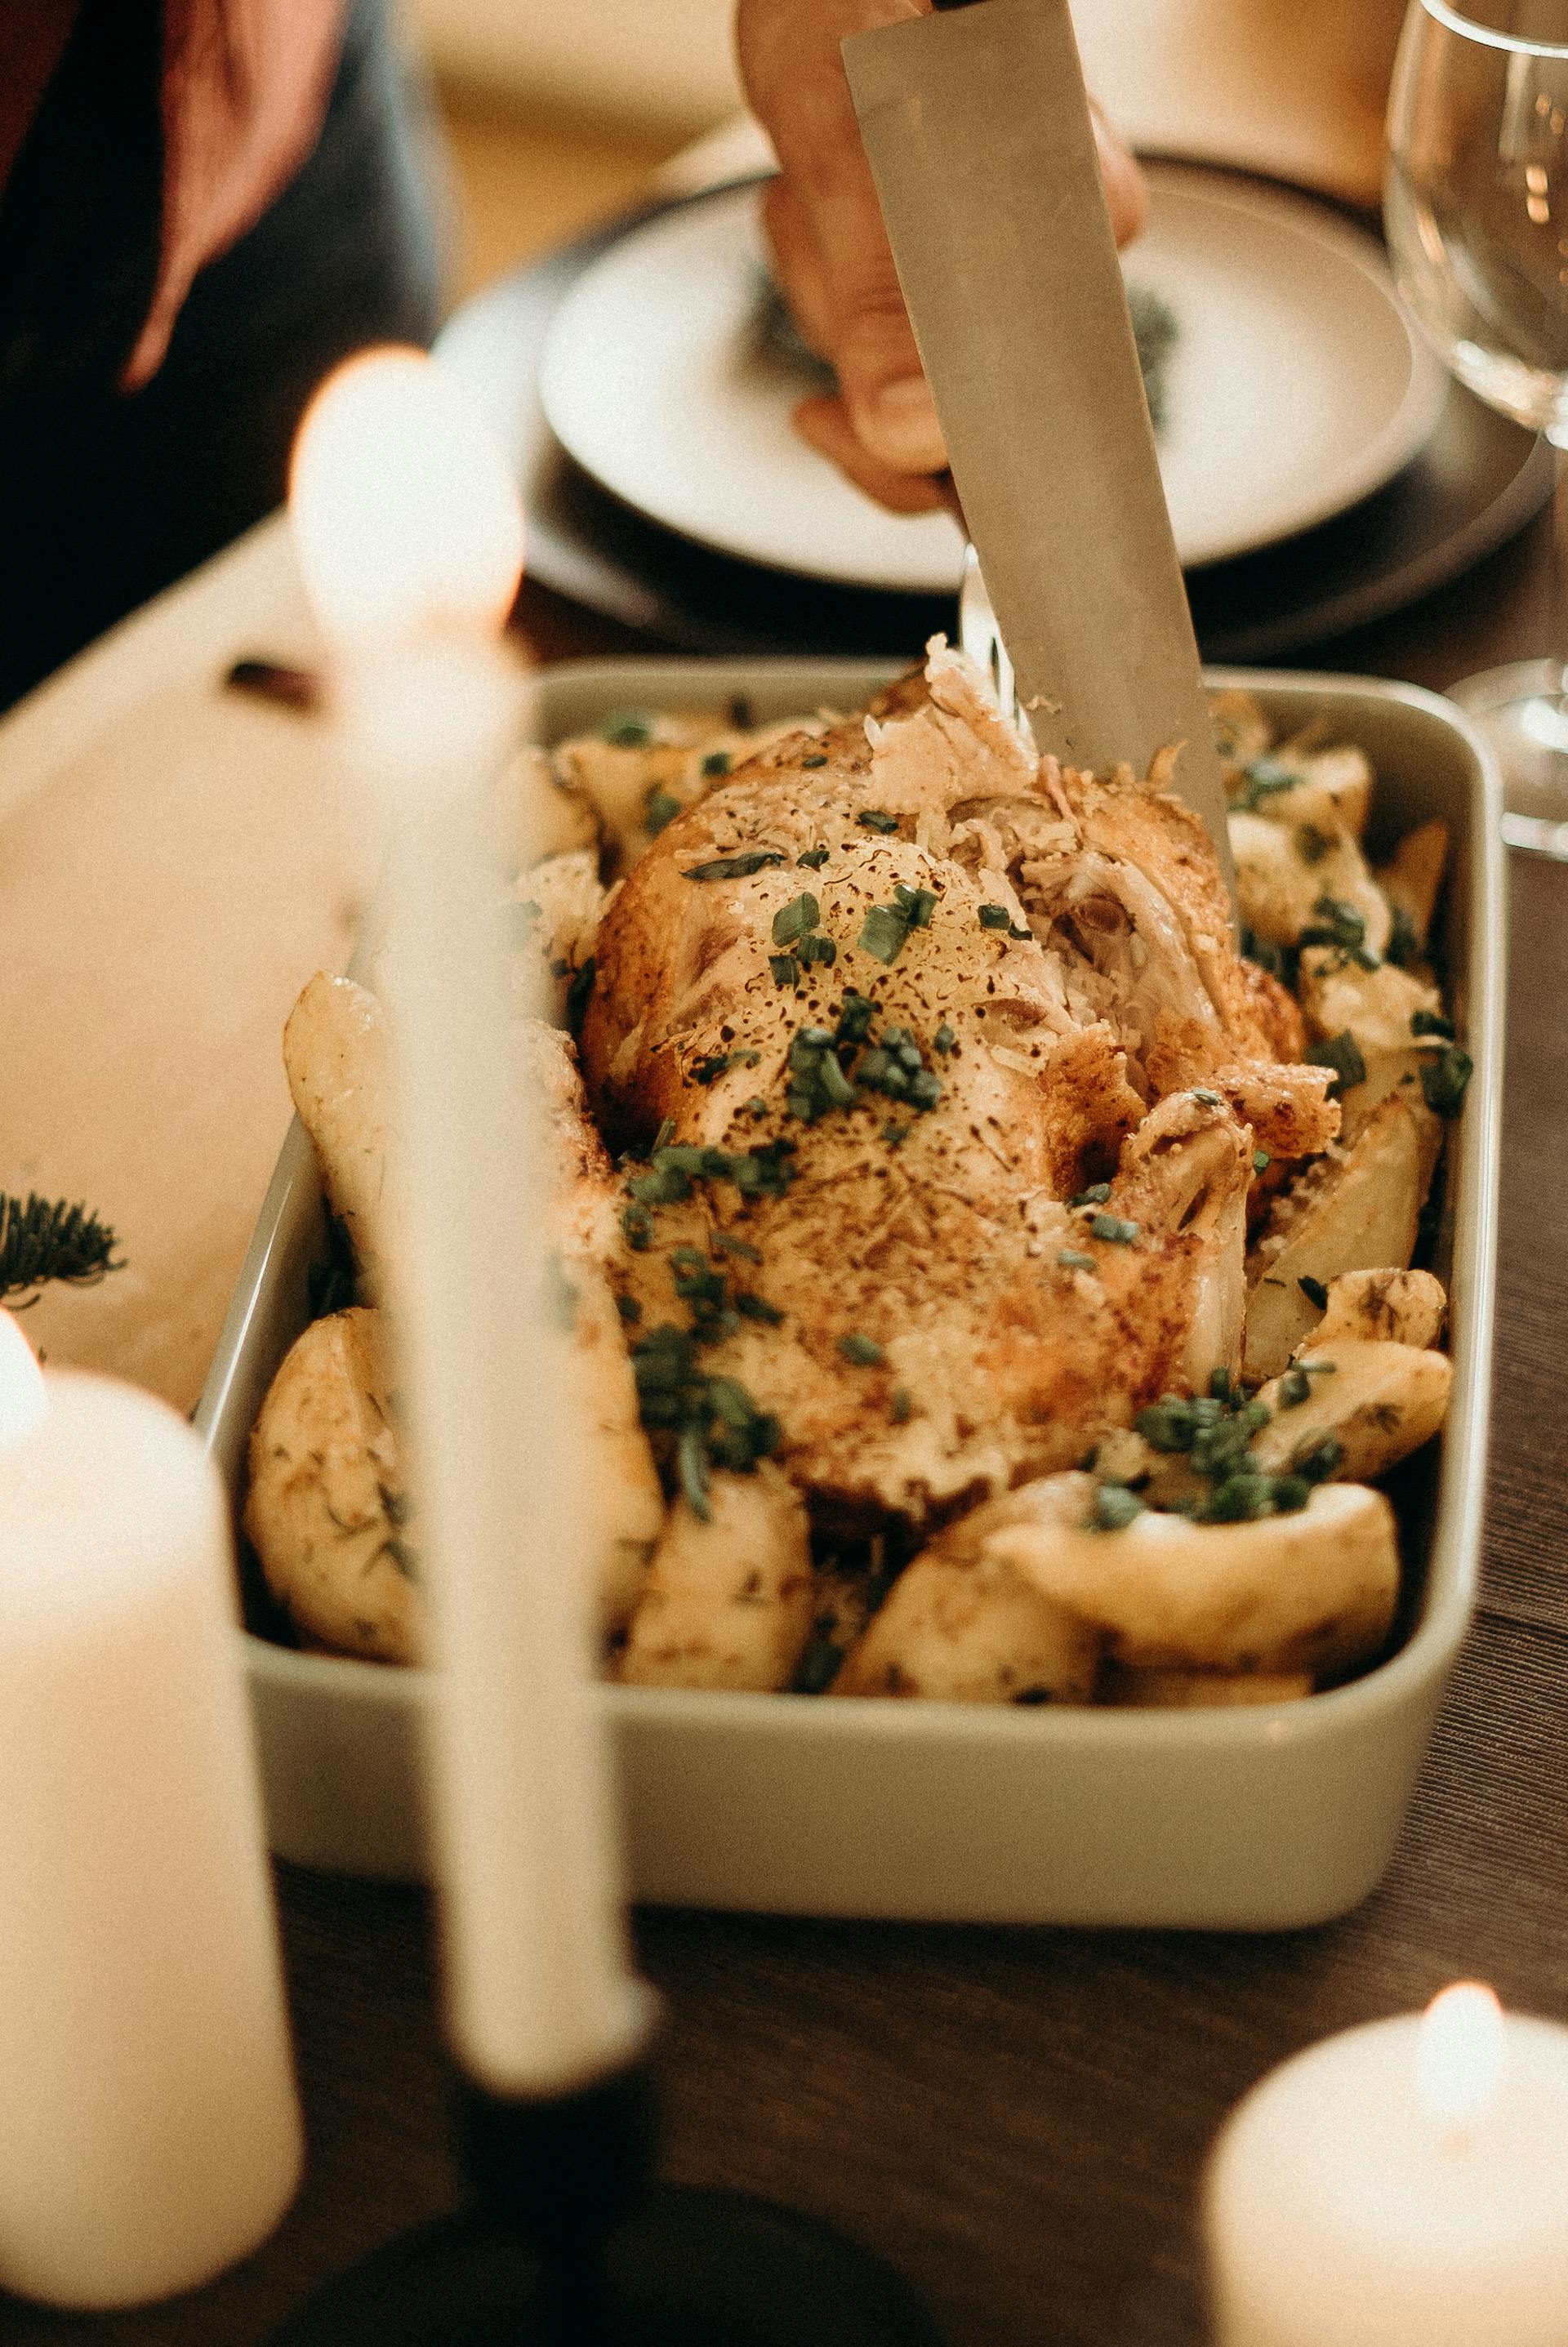 Roast chicken on a table | Source: Pexels